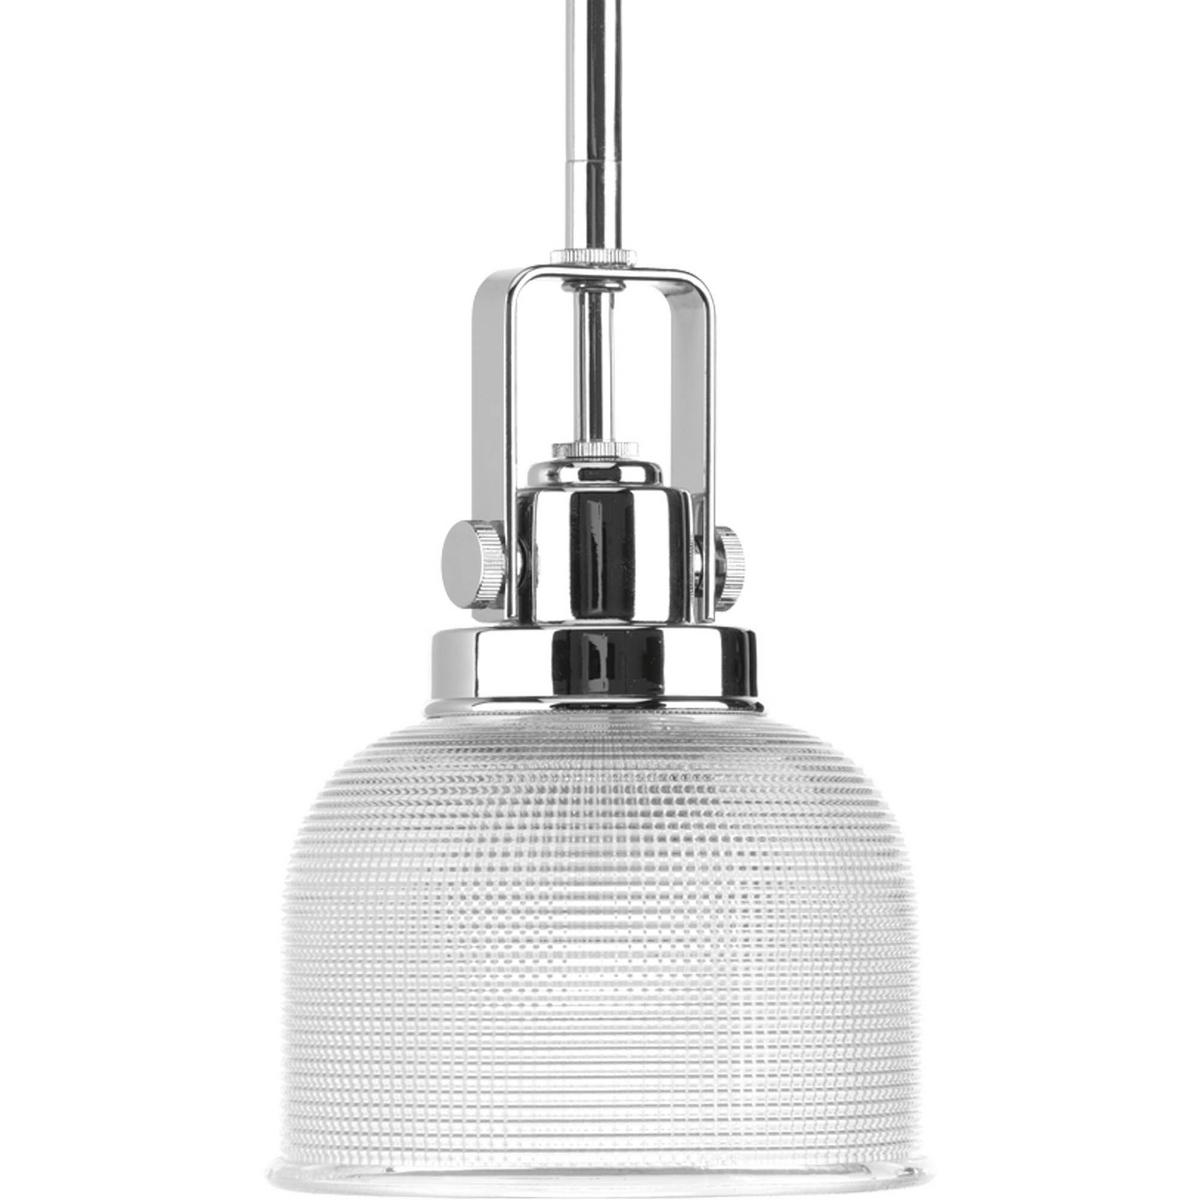 Hubbell P5173-15 The Archie Collection brings a vintage, industrial flair to interior settings. The collection’s distinctive double prismatic glass adds visual interest as its crisscross pattern comes to life when illuminated. The distinctive finely crafted strap and knob